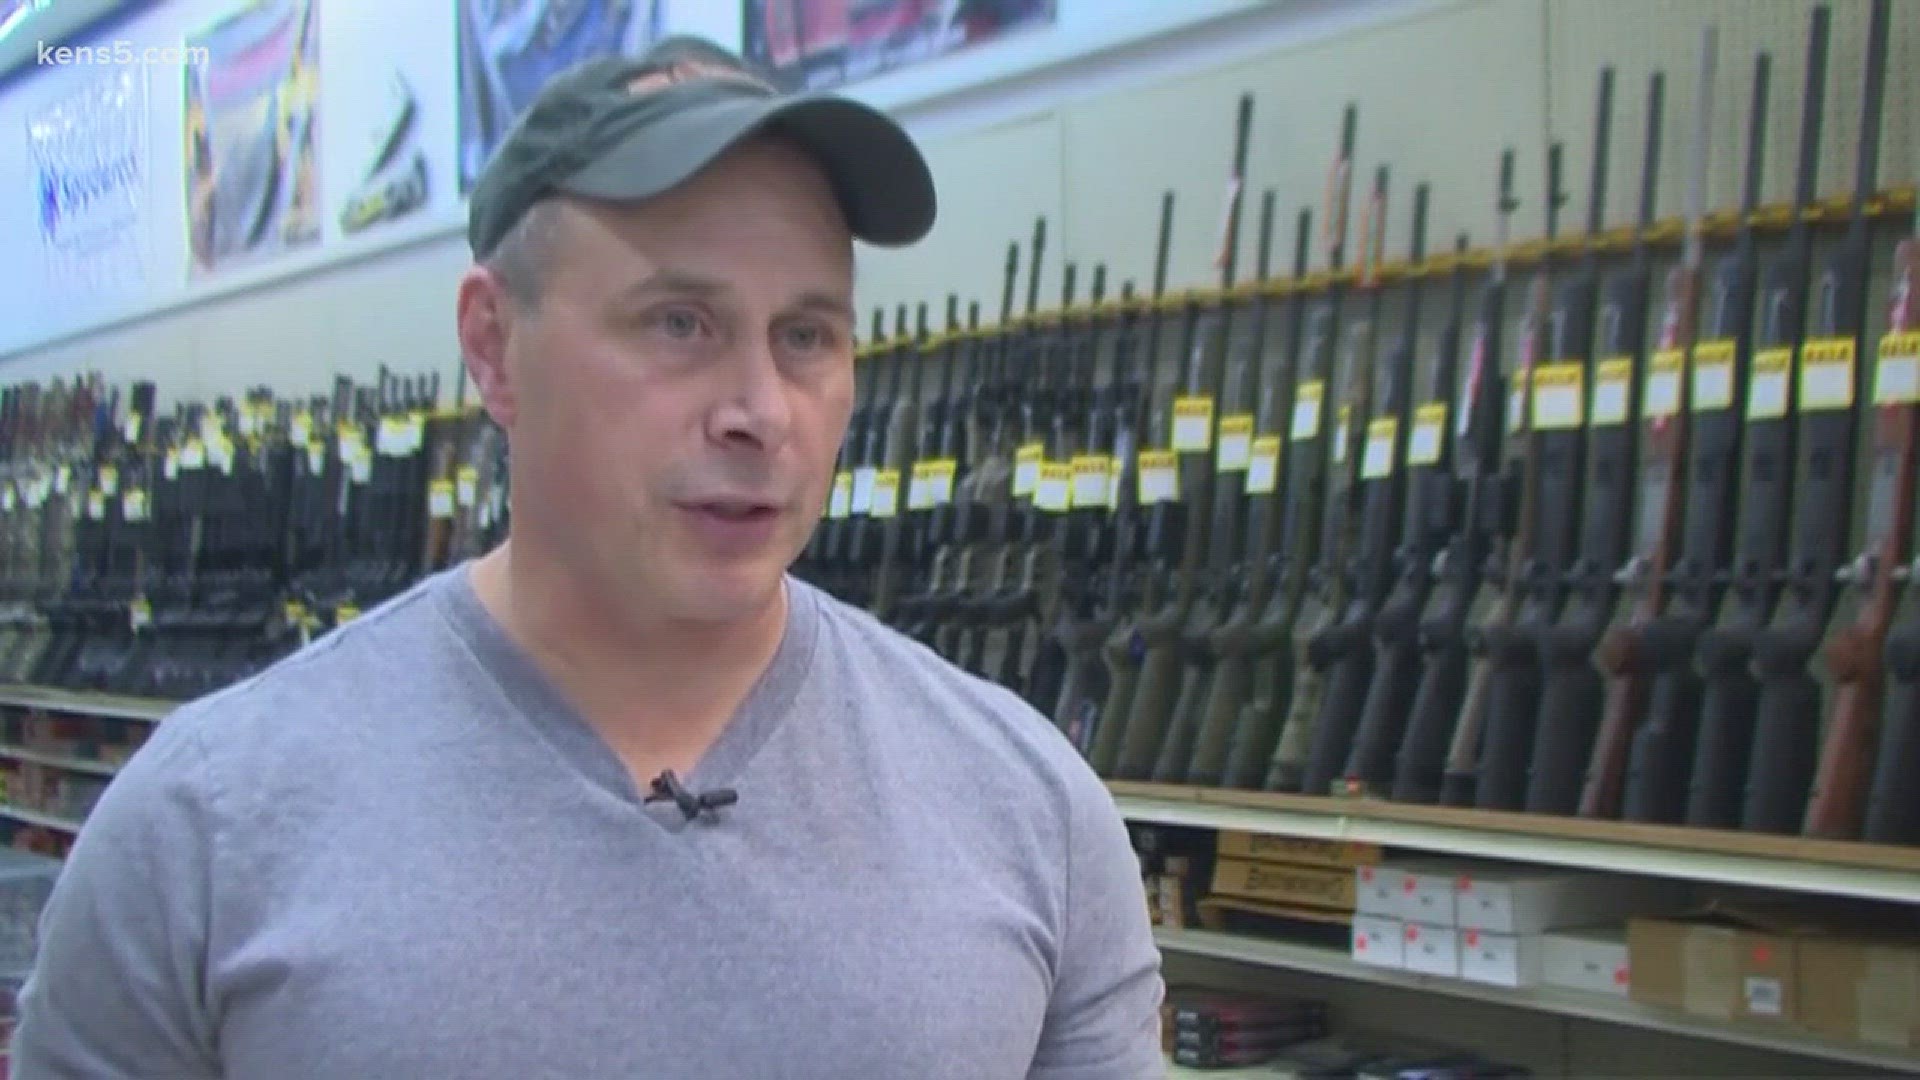 Though the shooter should not have been able to purchase a gun, he did-- and legally.